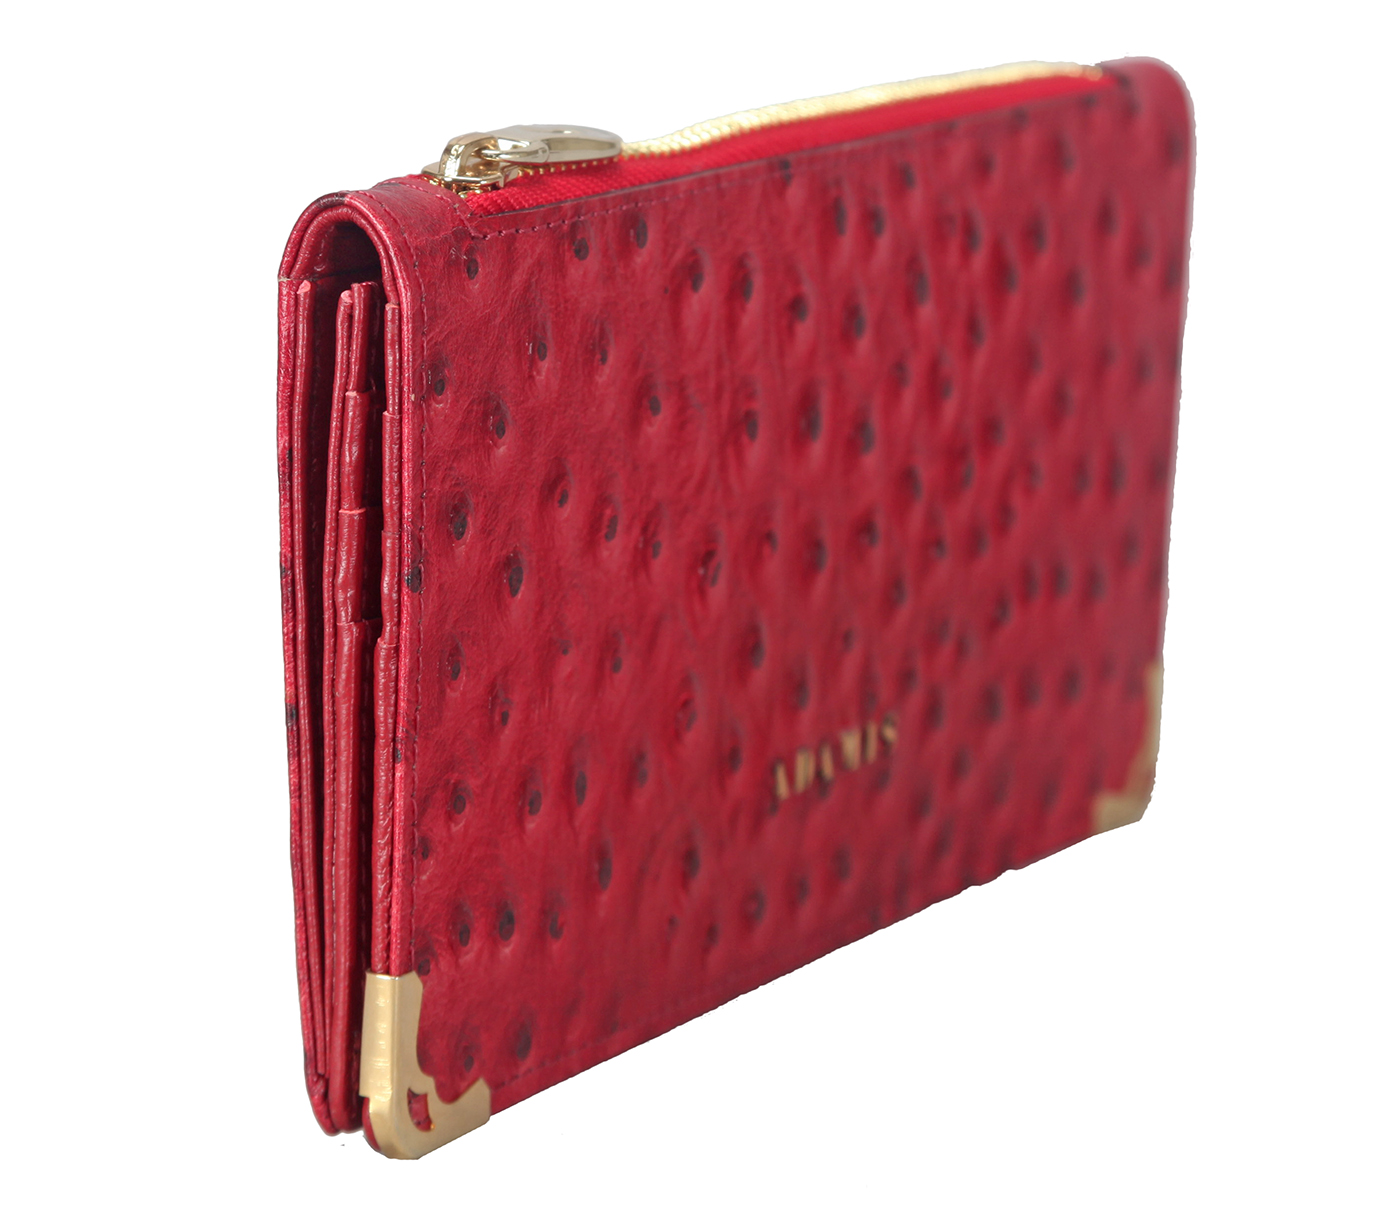 W314-Montana-Women's bifold button closing wallet in Genuine Leather - Red